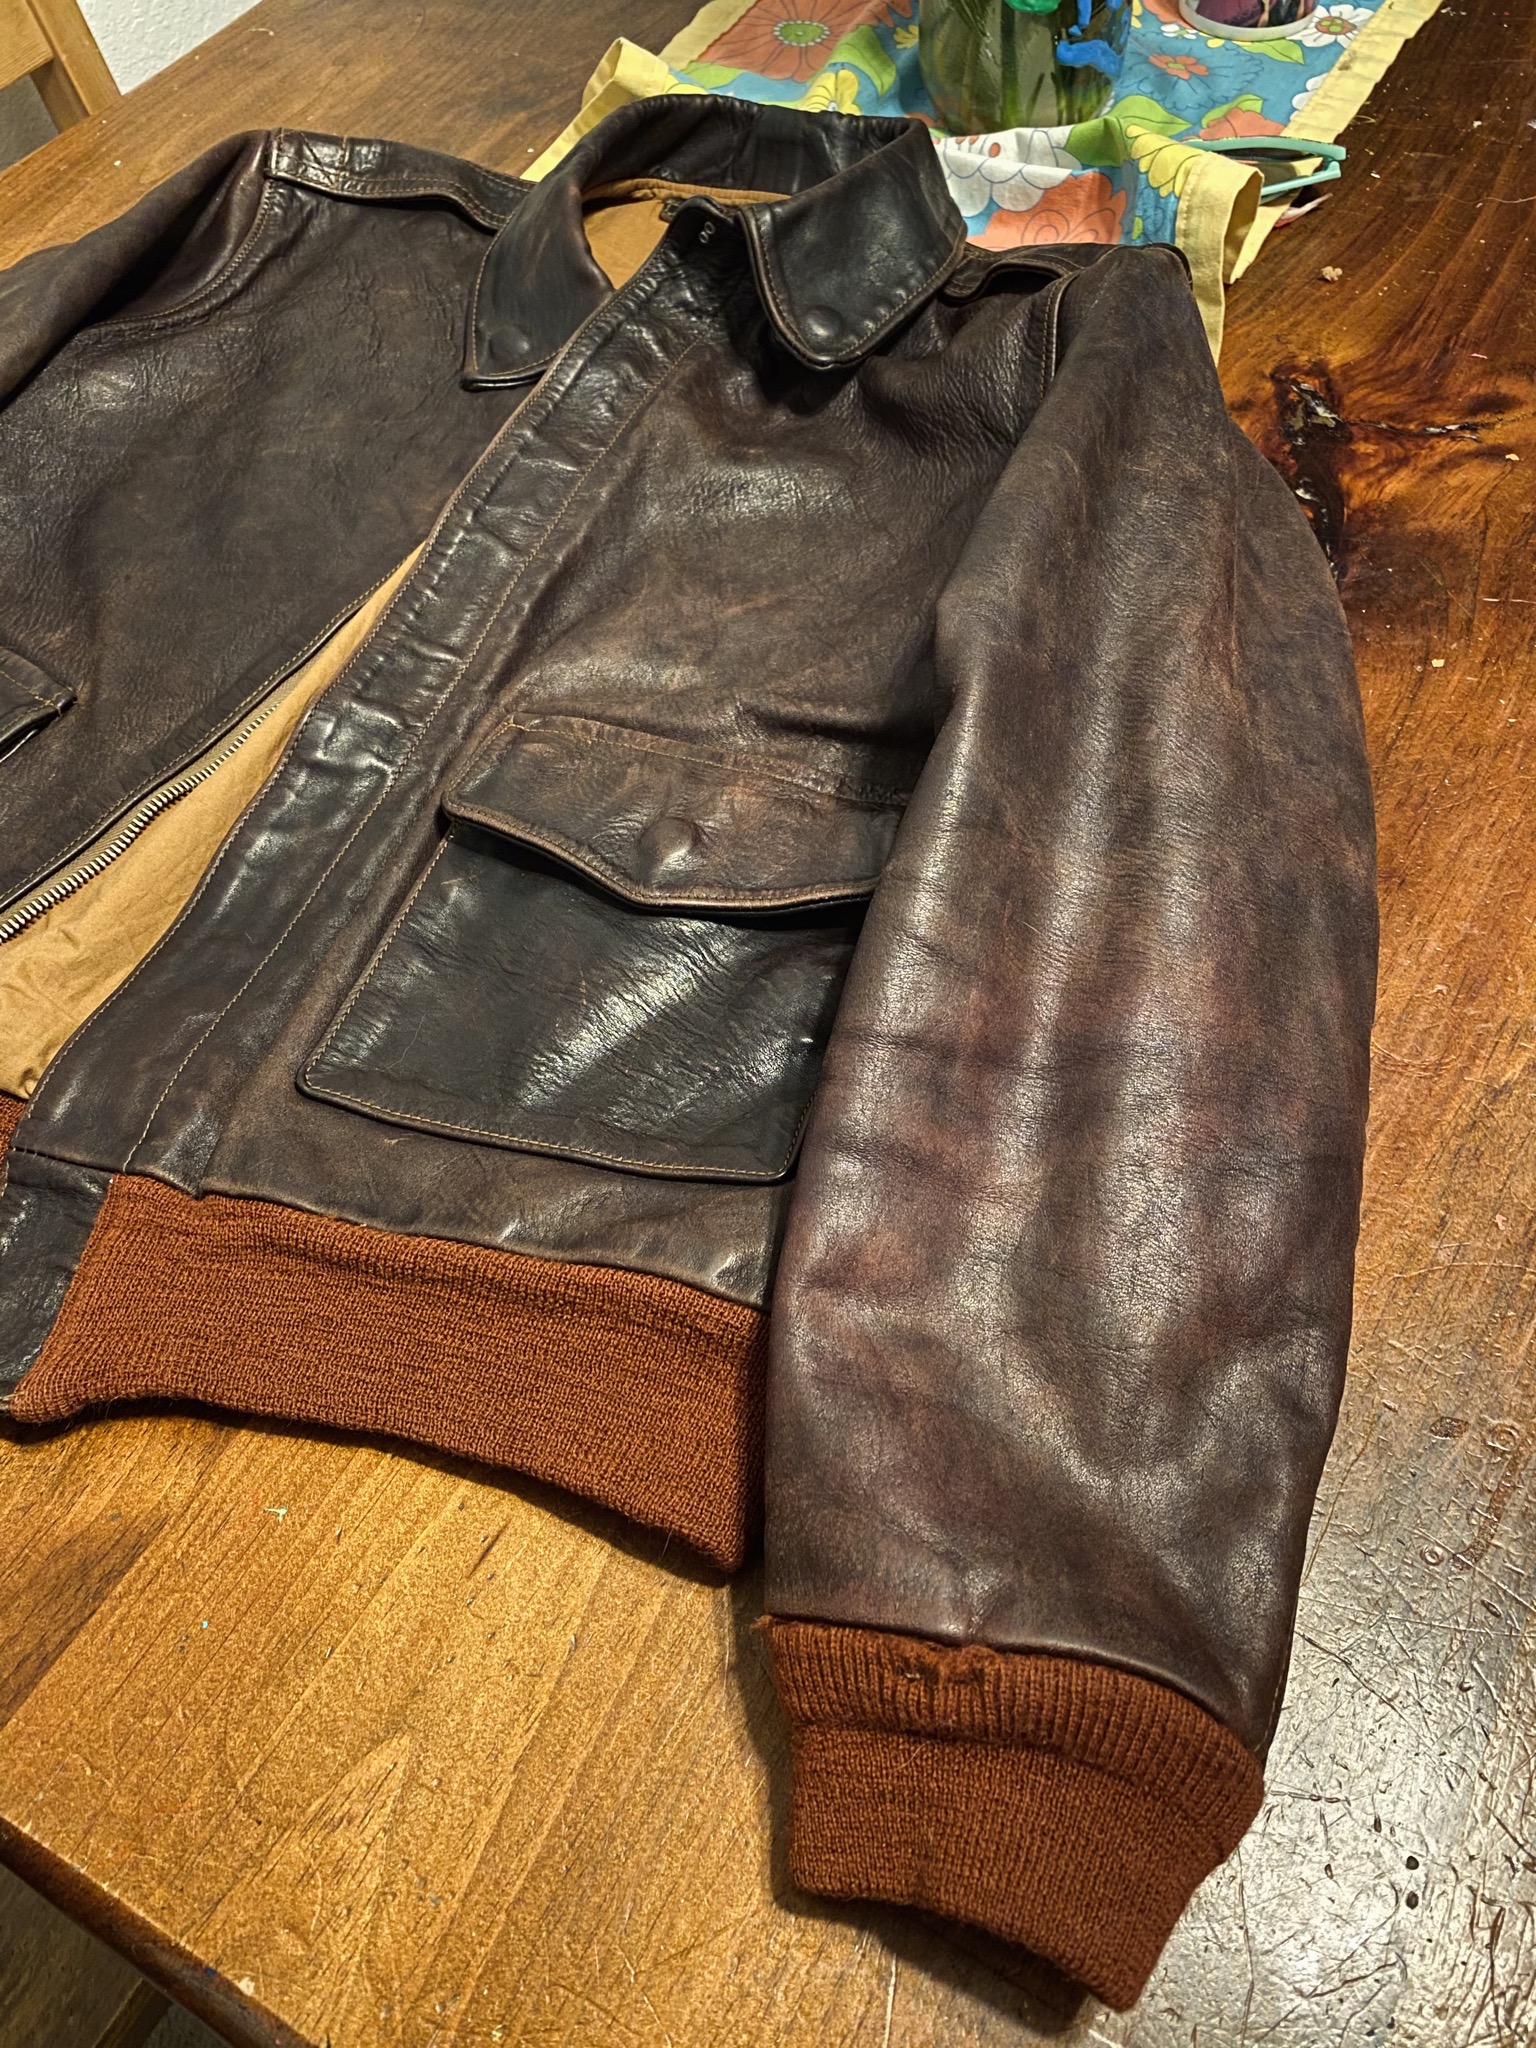 Show Us Your Bill Kelso A2 and Platon DuBow Jackets. | Vintage Leather ...